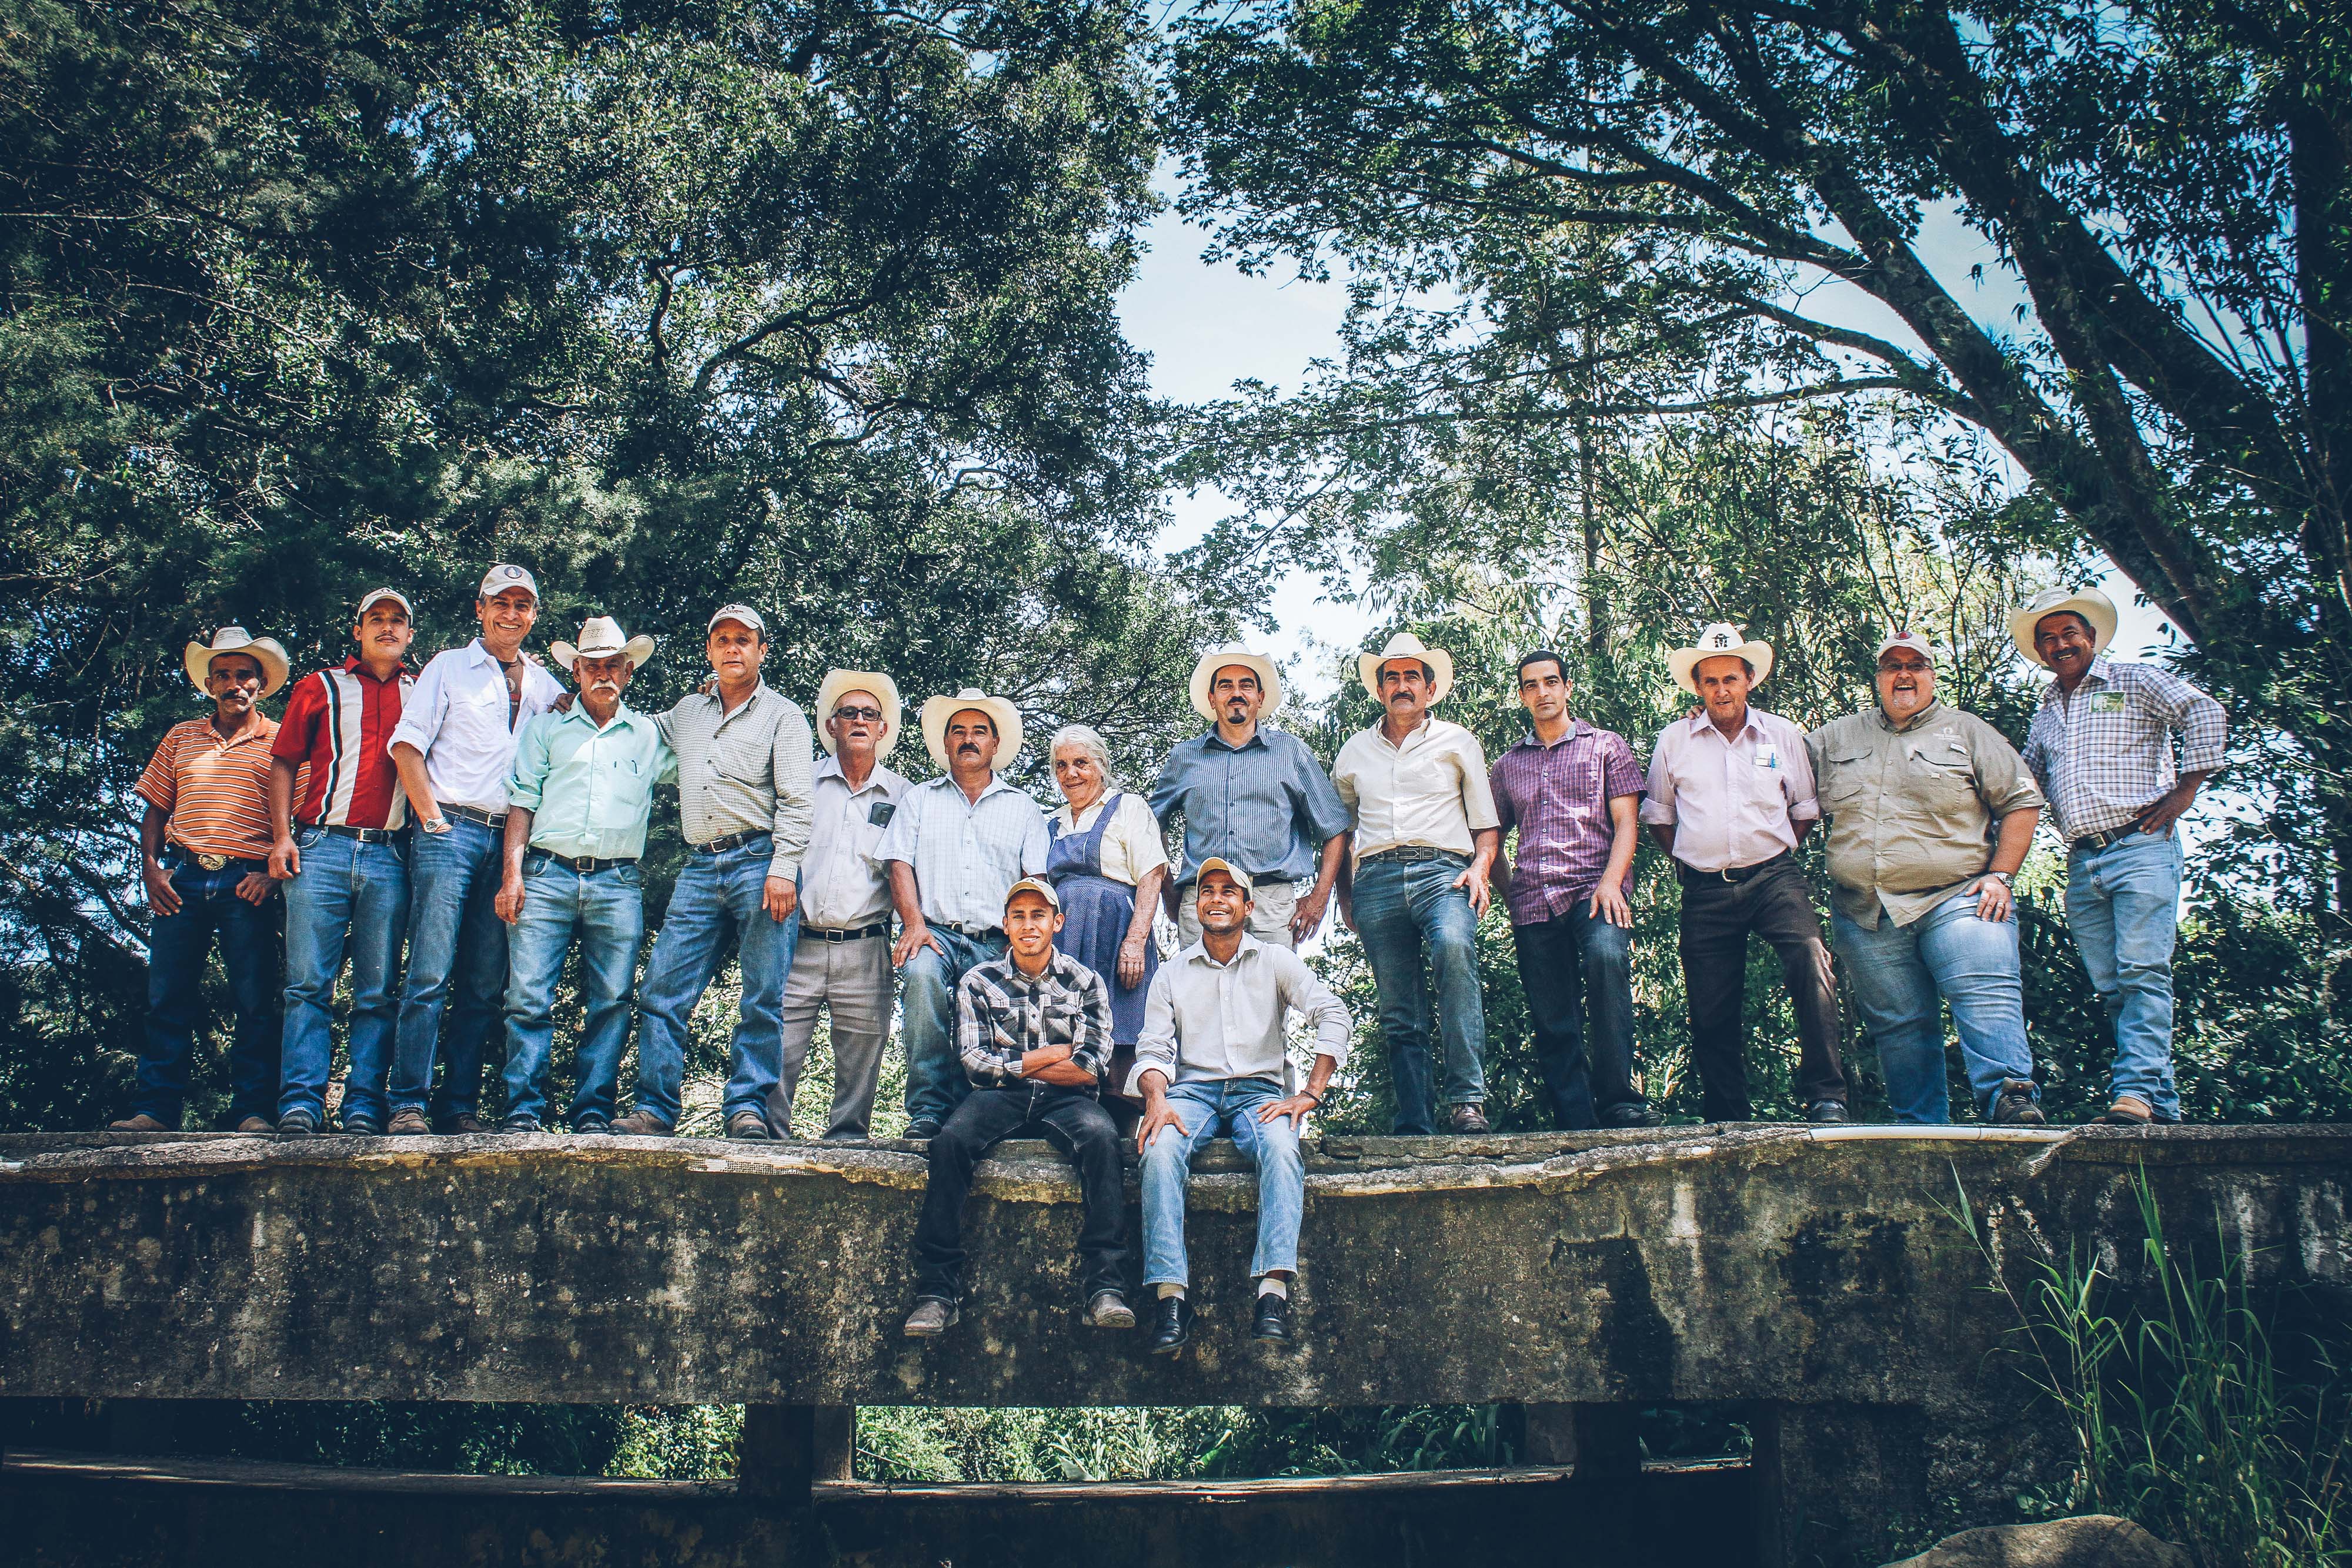 Here are some of the Thrive Farmers behind Thrive Farmers coffee.